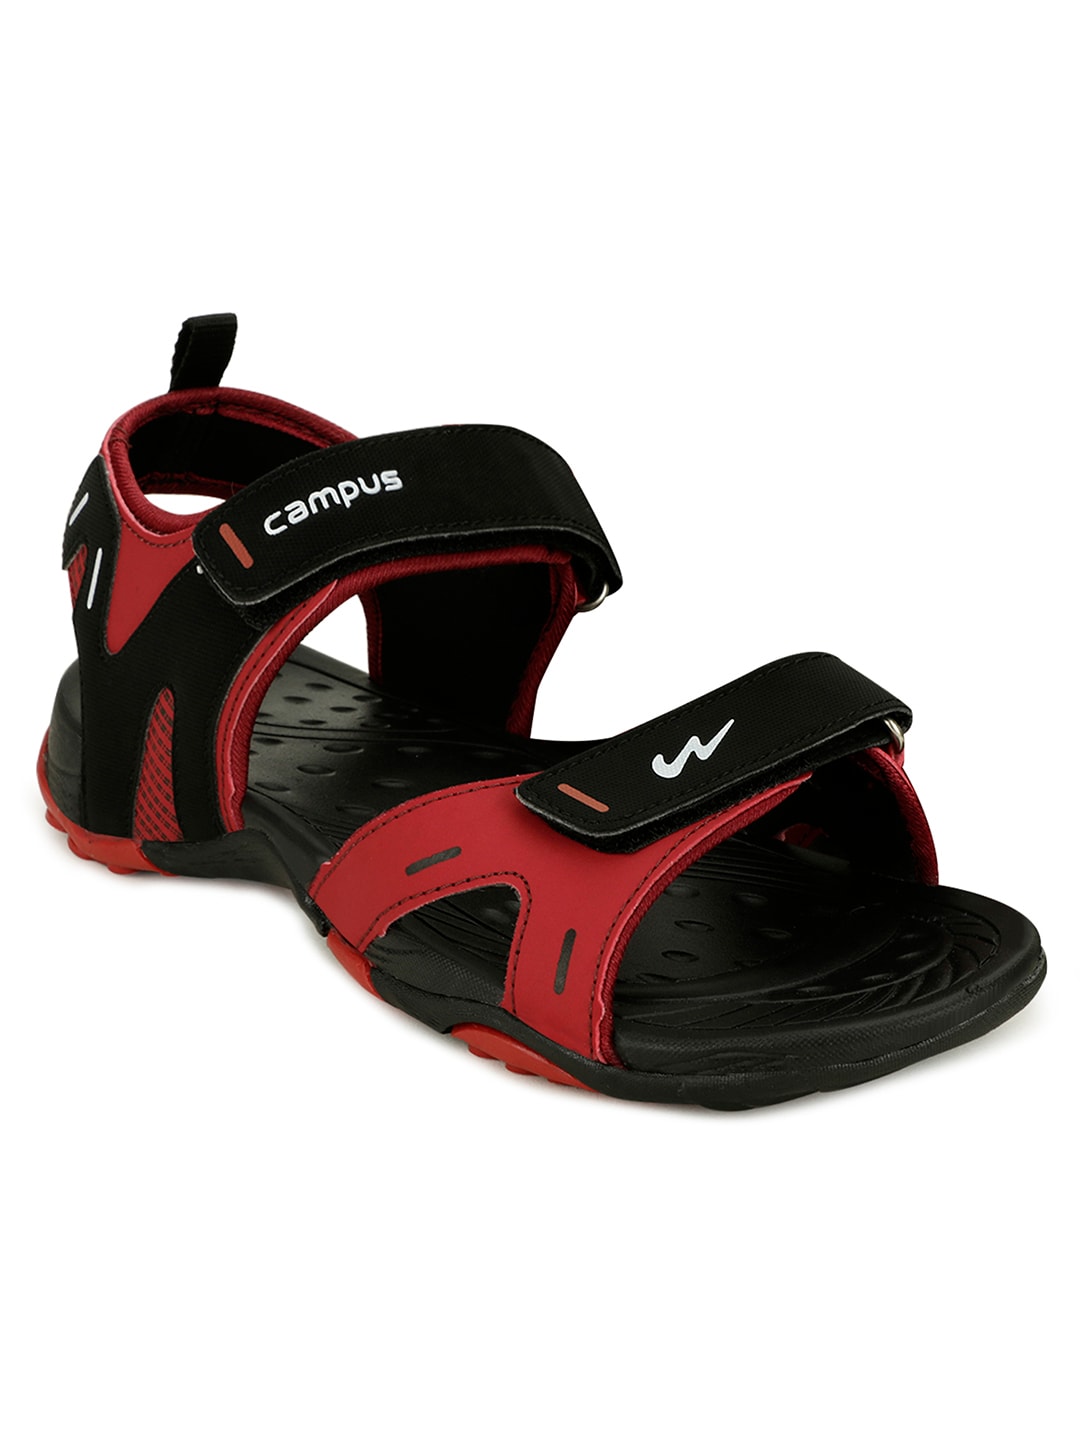 Campus Men's GC-2207 RED/L.GRY Sandal 10-UK/India : Amazon.in: Fashion